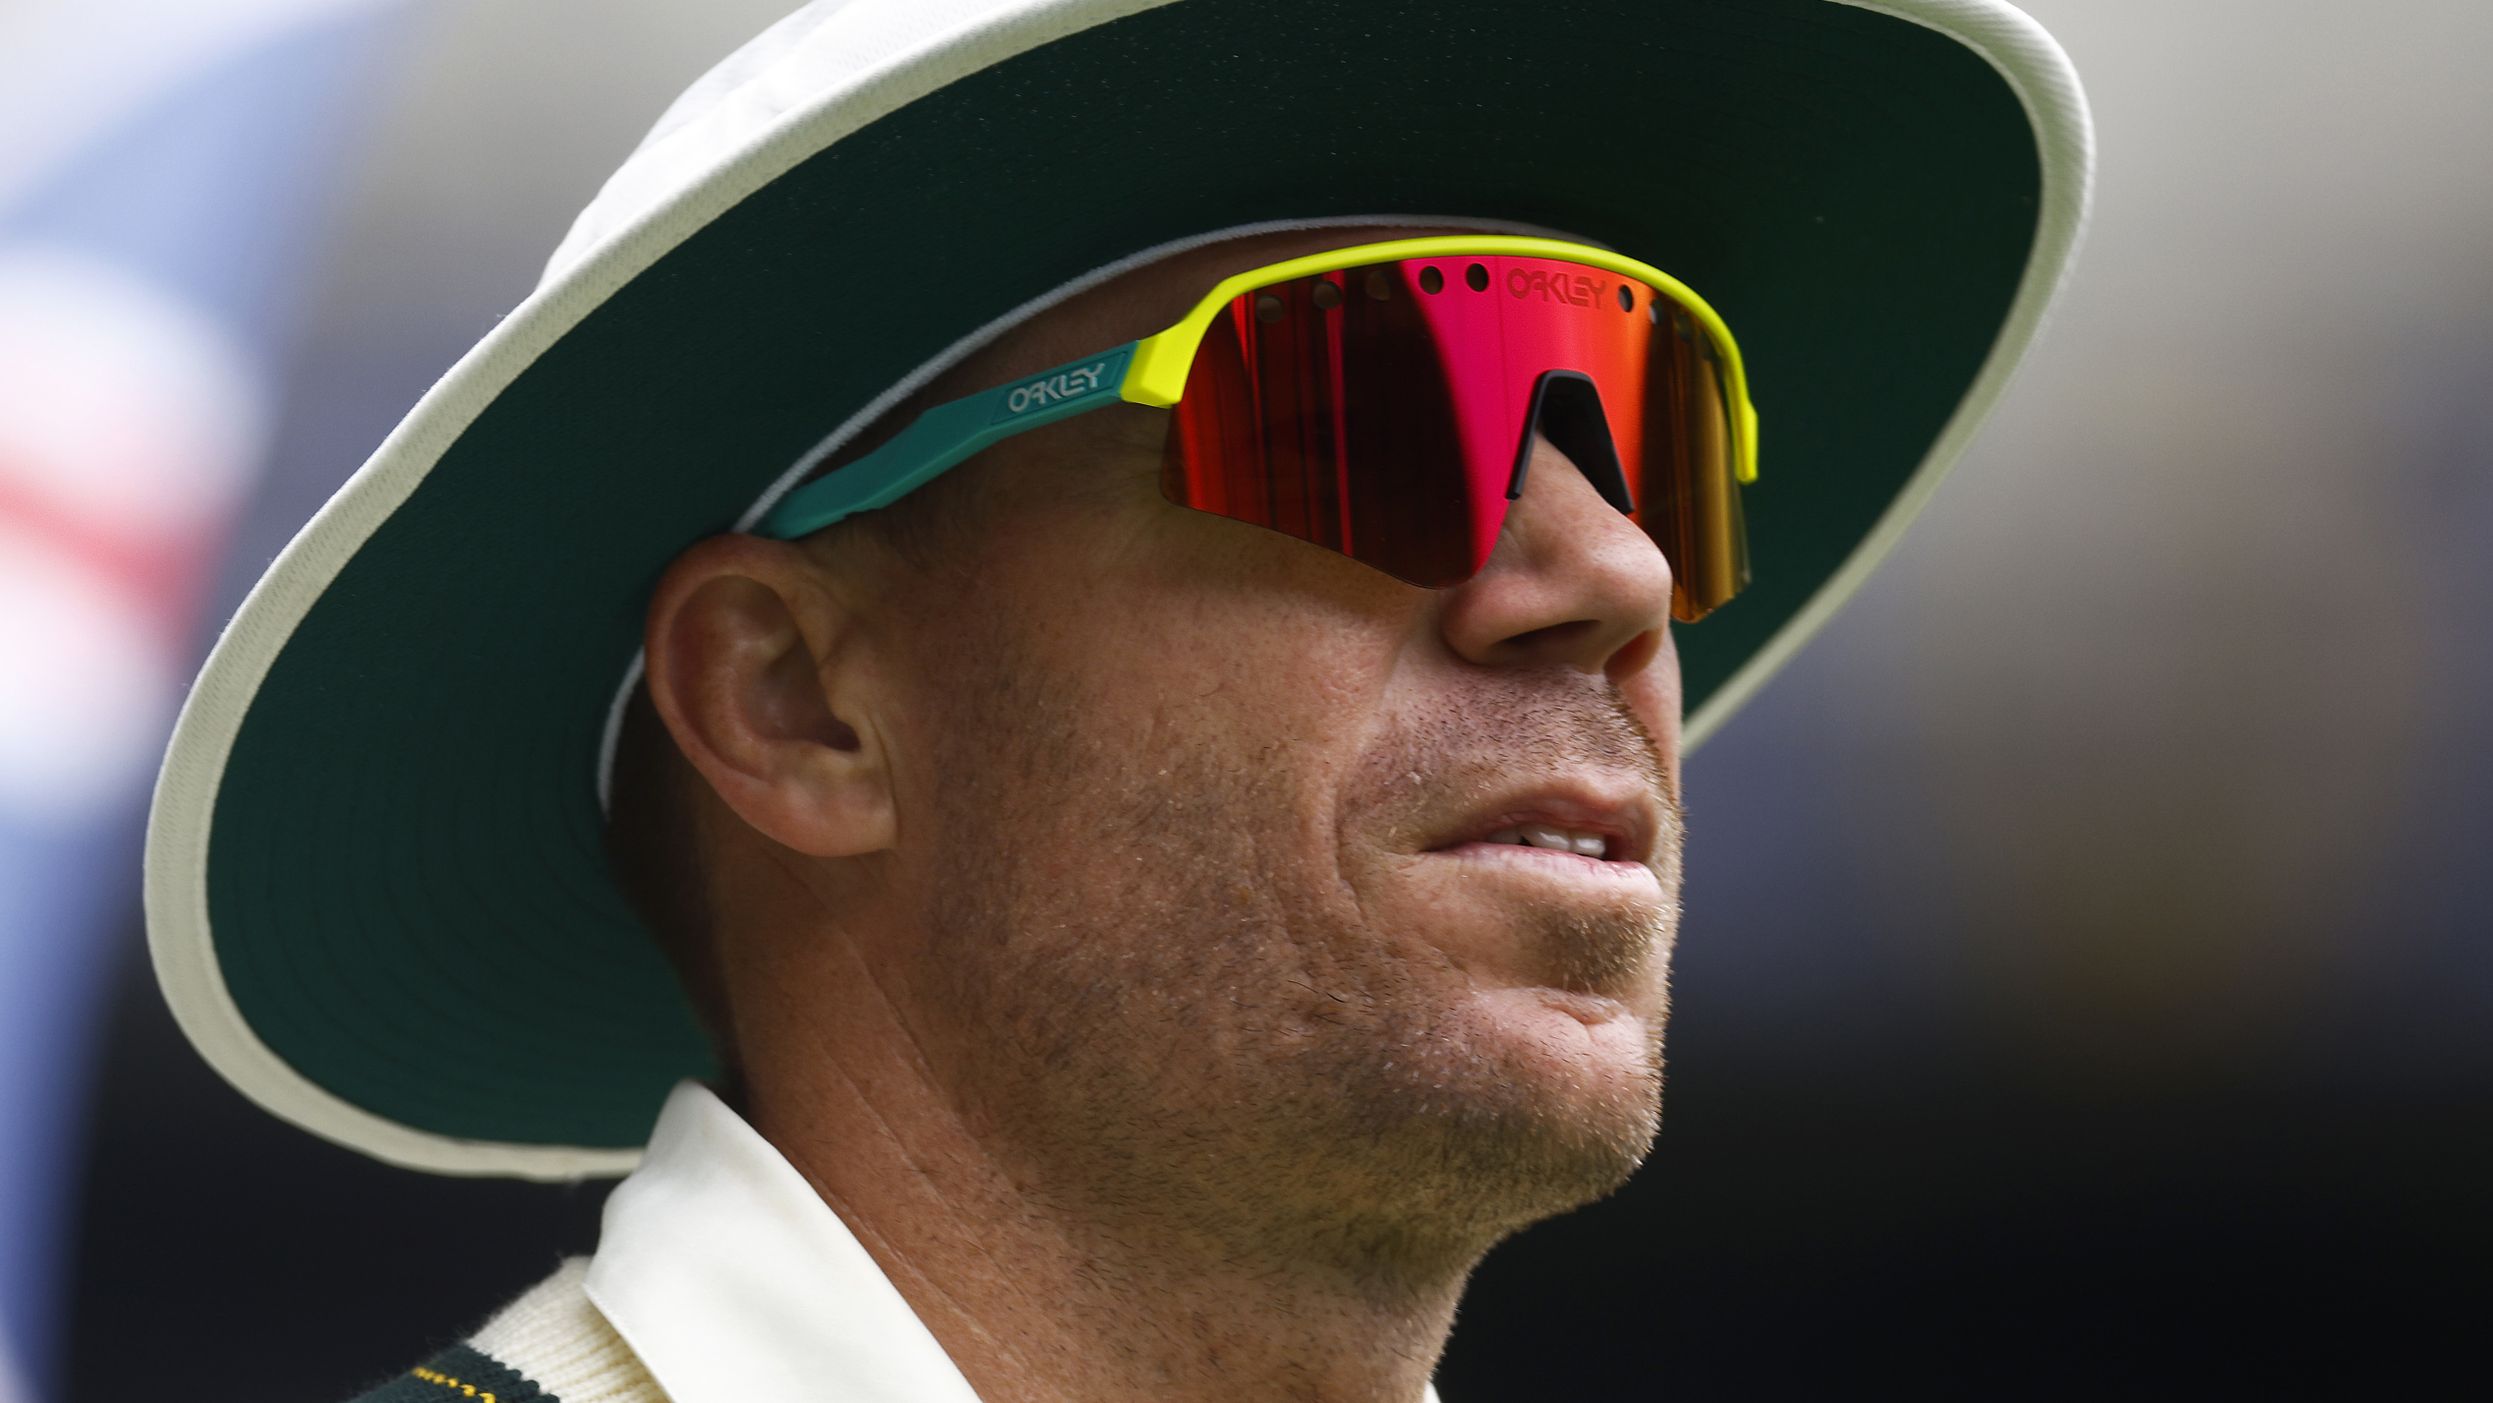 MELBOURNE, AUSTRALIA - DECEMBER 29: David Warner of Australia looks on during day four of the Second Test match in the series between Australia and South Africa at Melbourne Cricket Ground on December 29, 2022 in Melbourne, Australia. (Photo by Daniel Pockett/Getty Images)